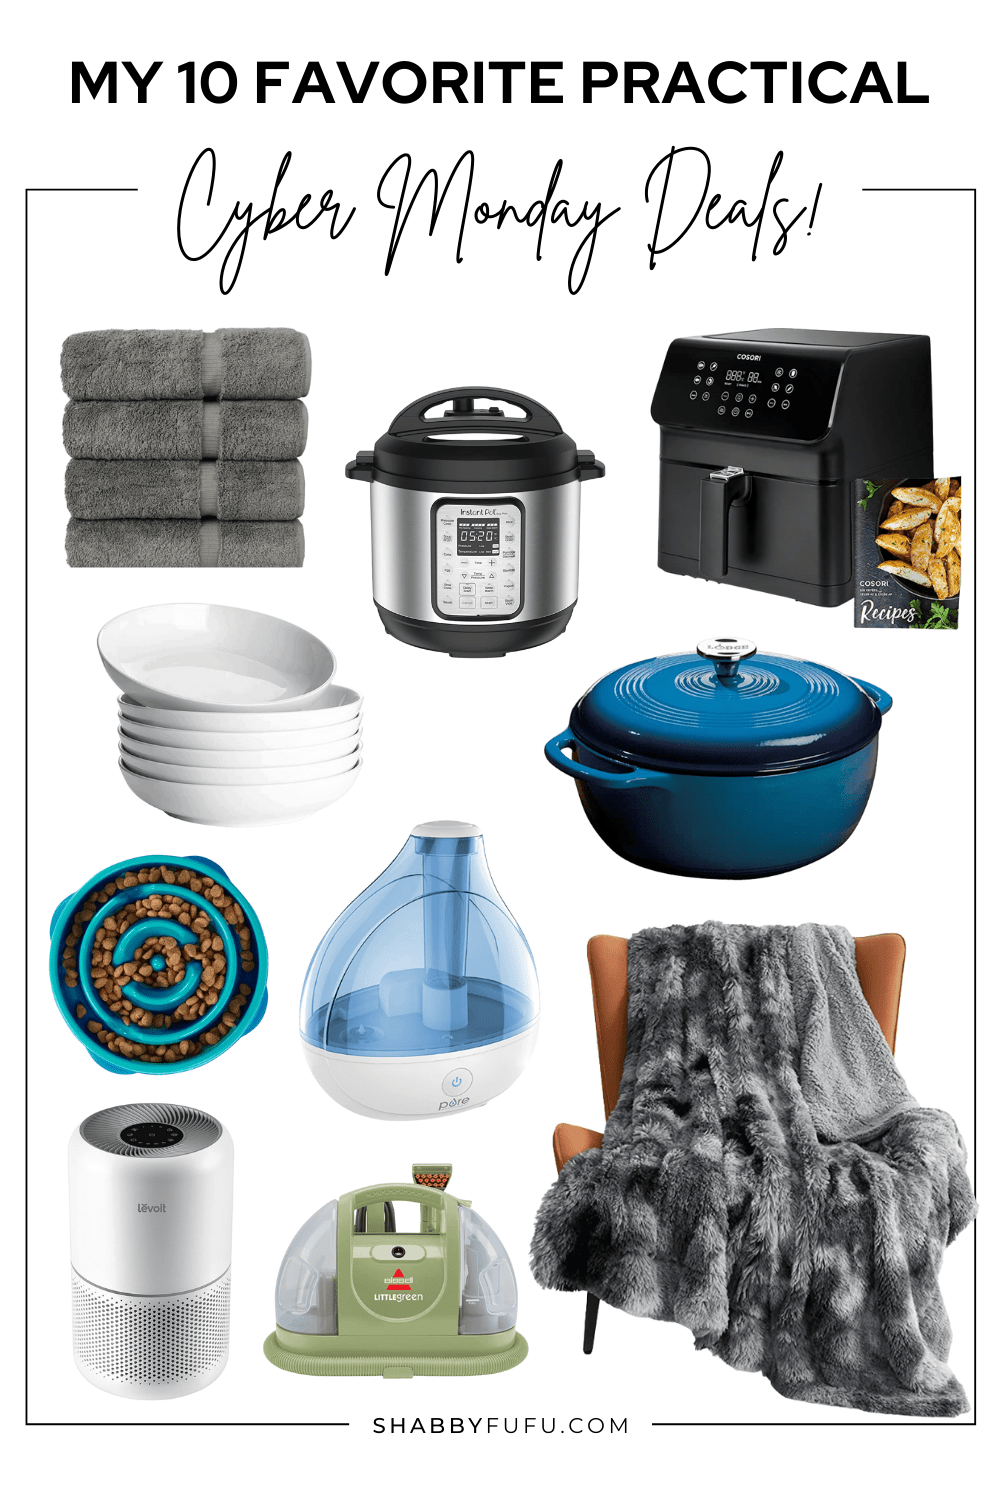 My 10 Favorite Practical Cyber Monday Deals! (& 2 Gift Cards)